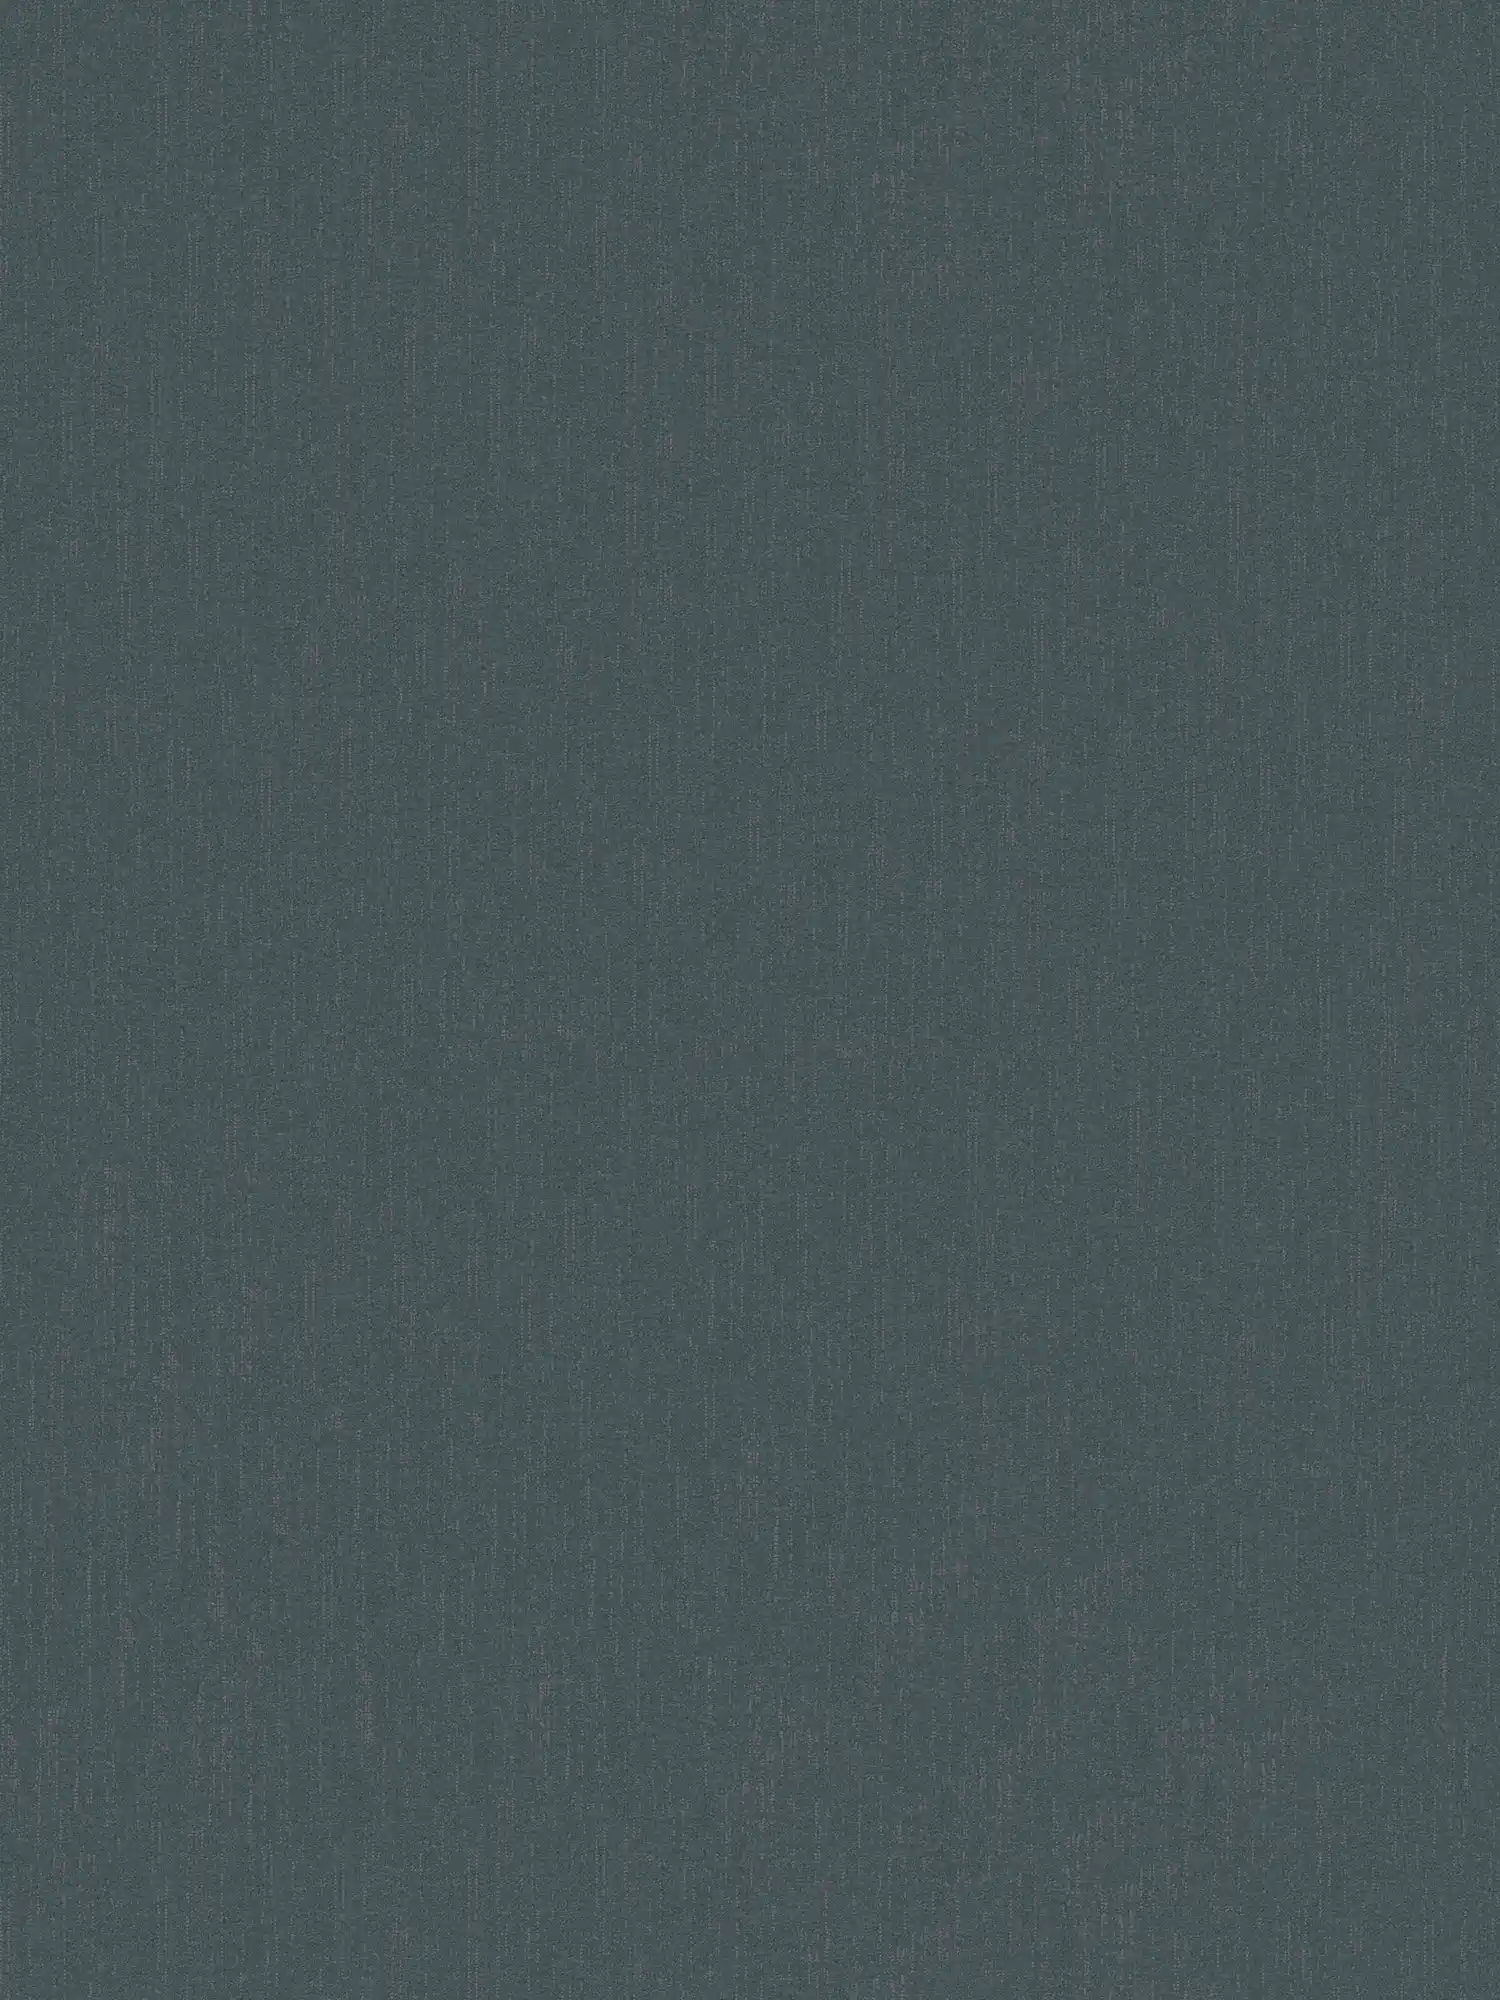 wallpaper anthracite grey with silver gloss effect - black, grey
